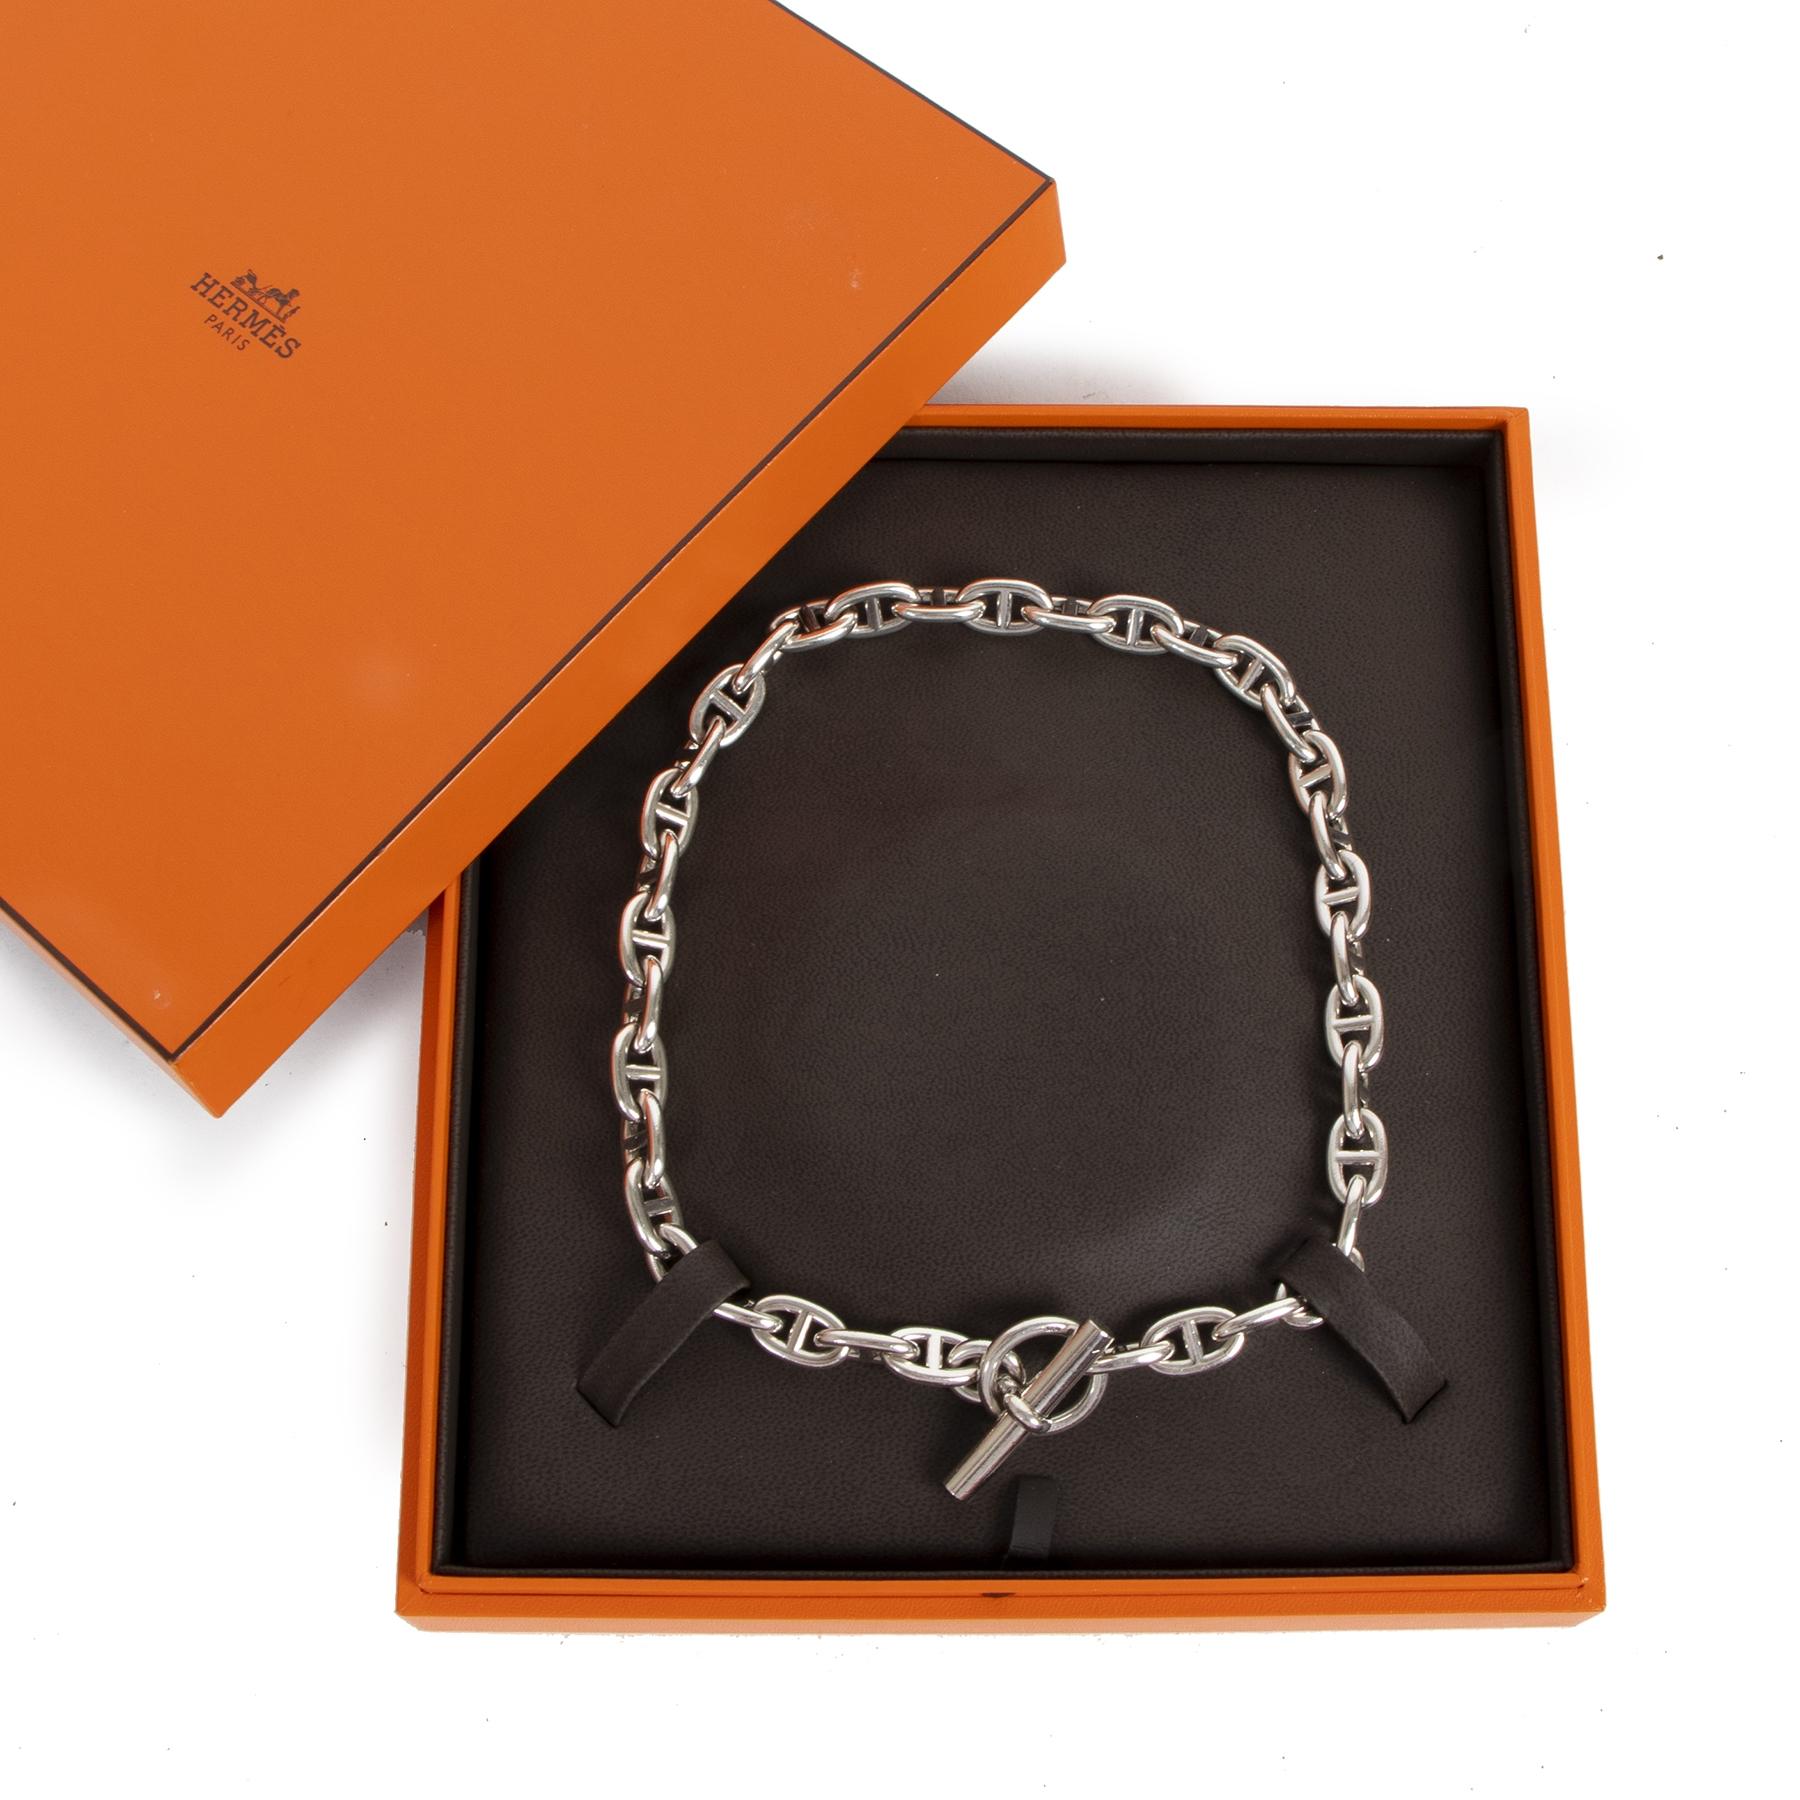 hermes chaine d'ancre necklace